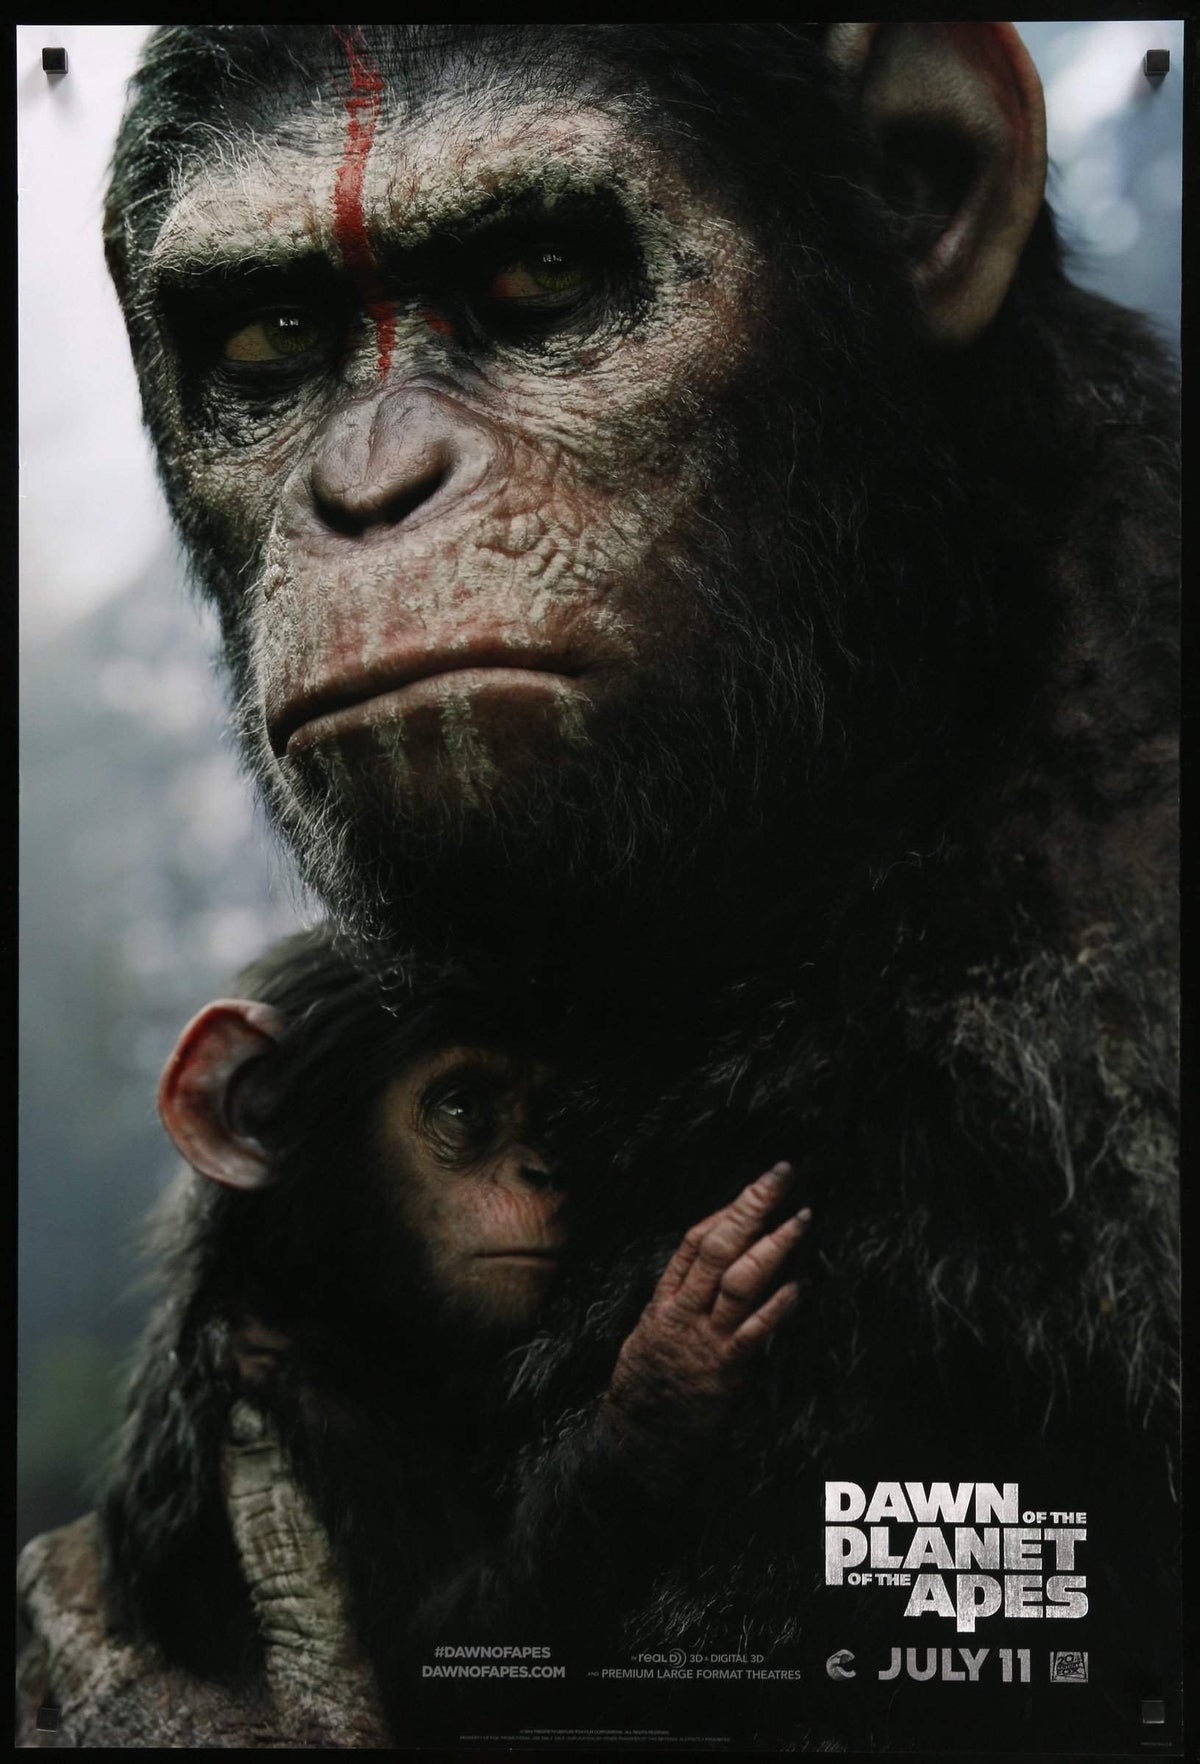 Dawn of the Planet of the Apes (2014) original movie poster for sale at Original Film Art